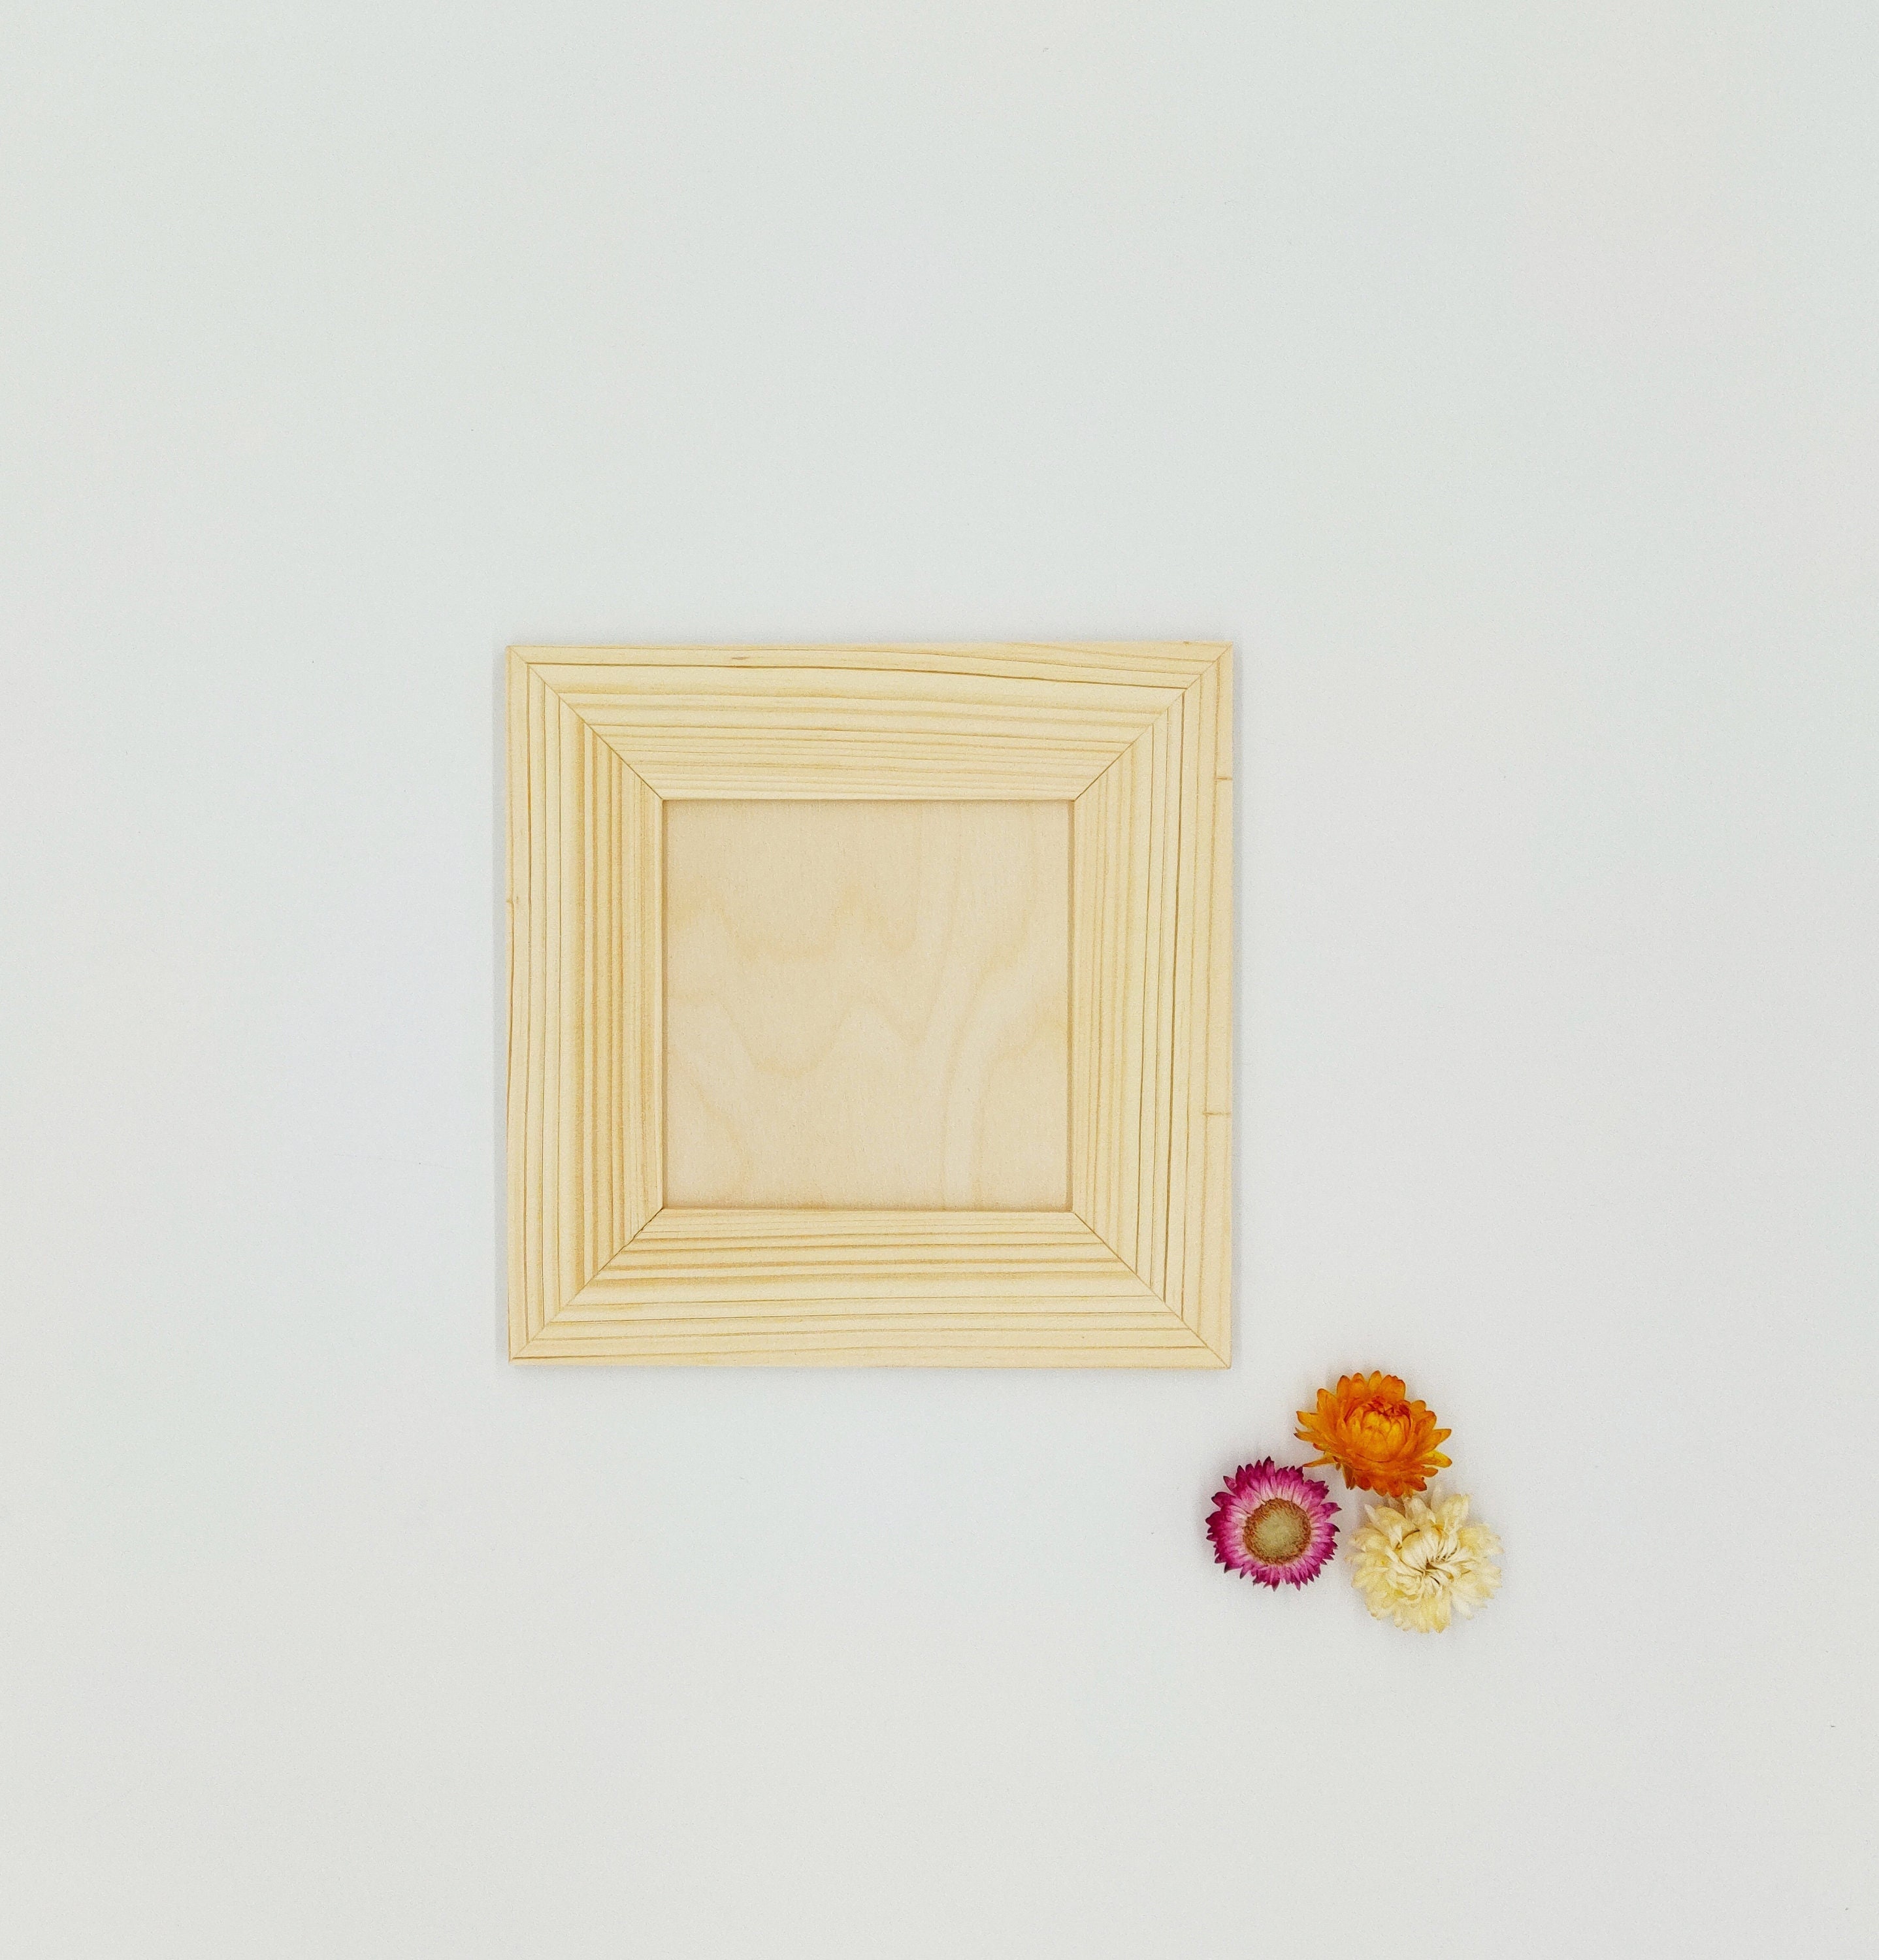 Flat Picture Frame 2 1/4 Wide Frame Unfinished Pine 12 X 16 